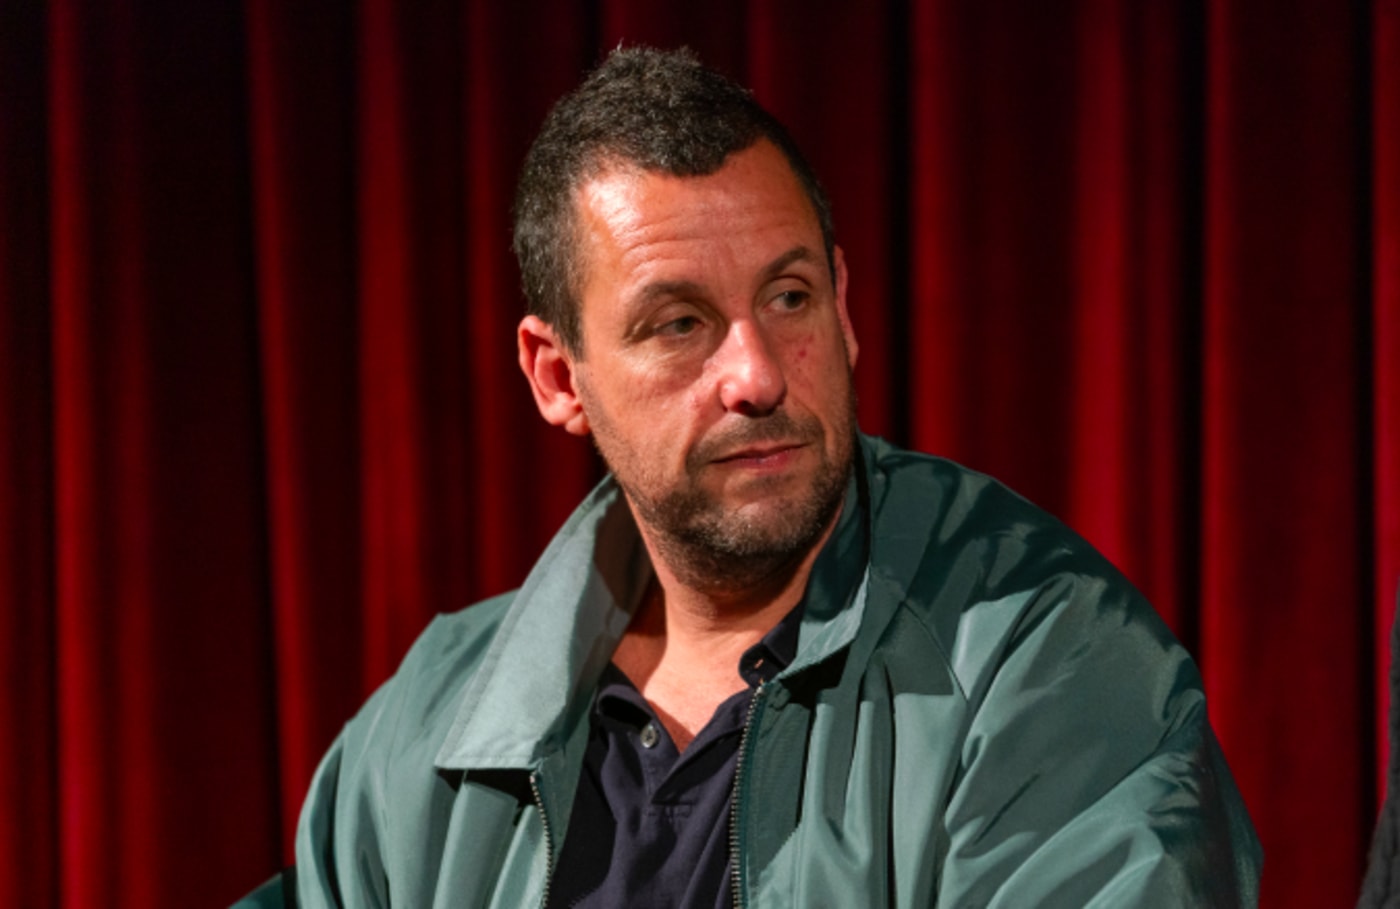 Adam Sandler attends The Academy Of Motion Picture Arts & Sciences